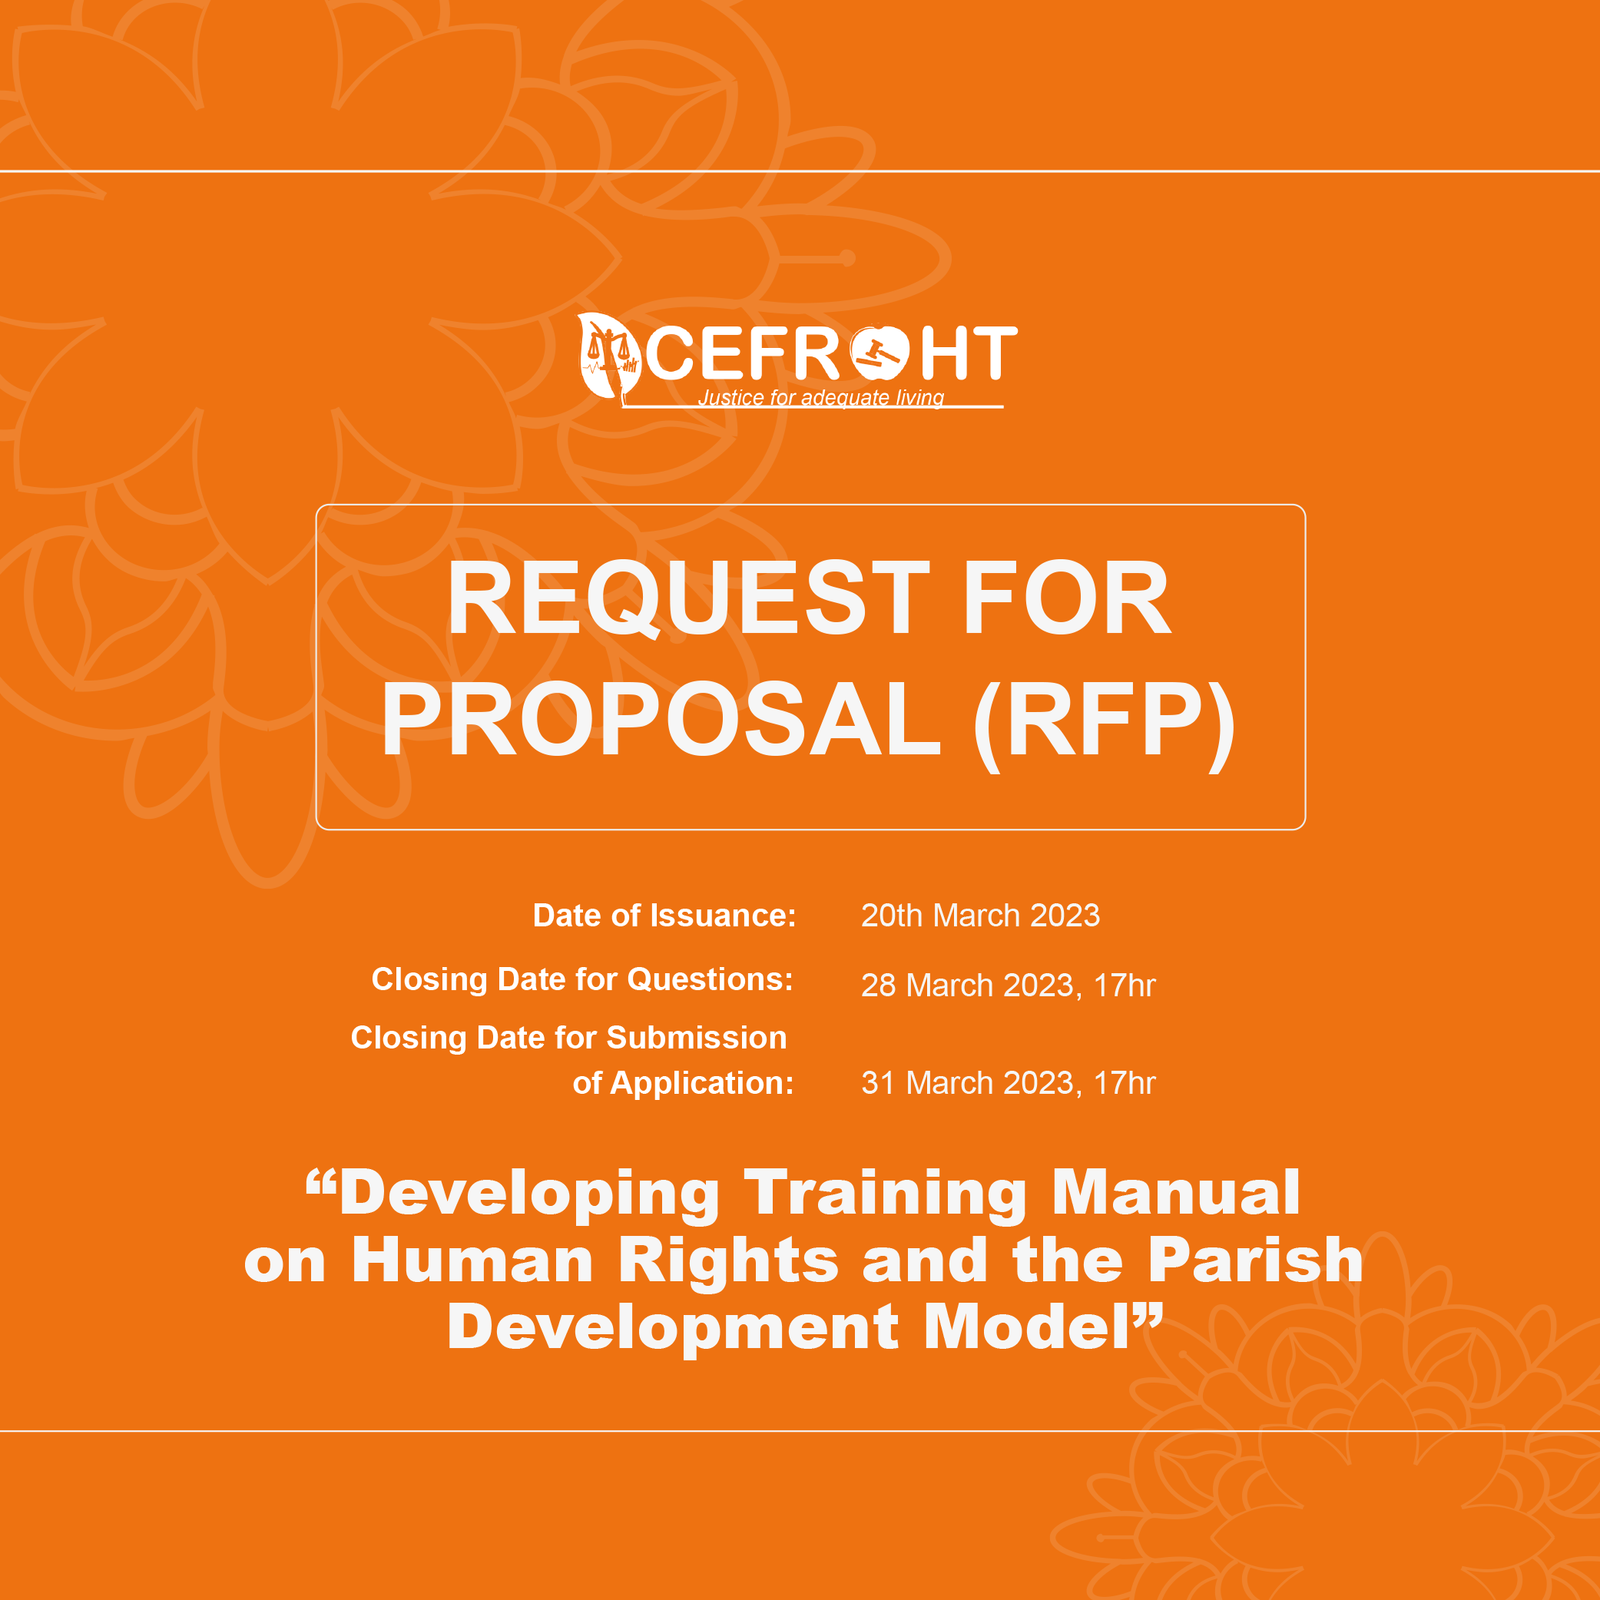 REQUEST FOR PROPOSAL (RFP)